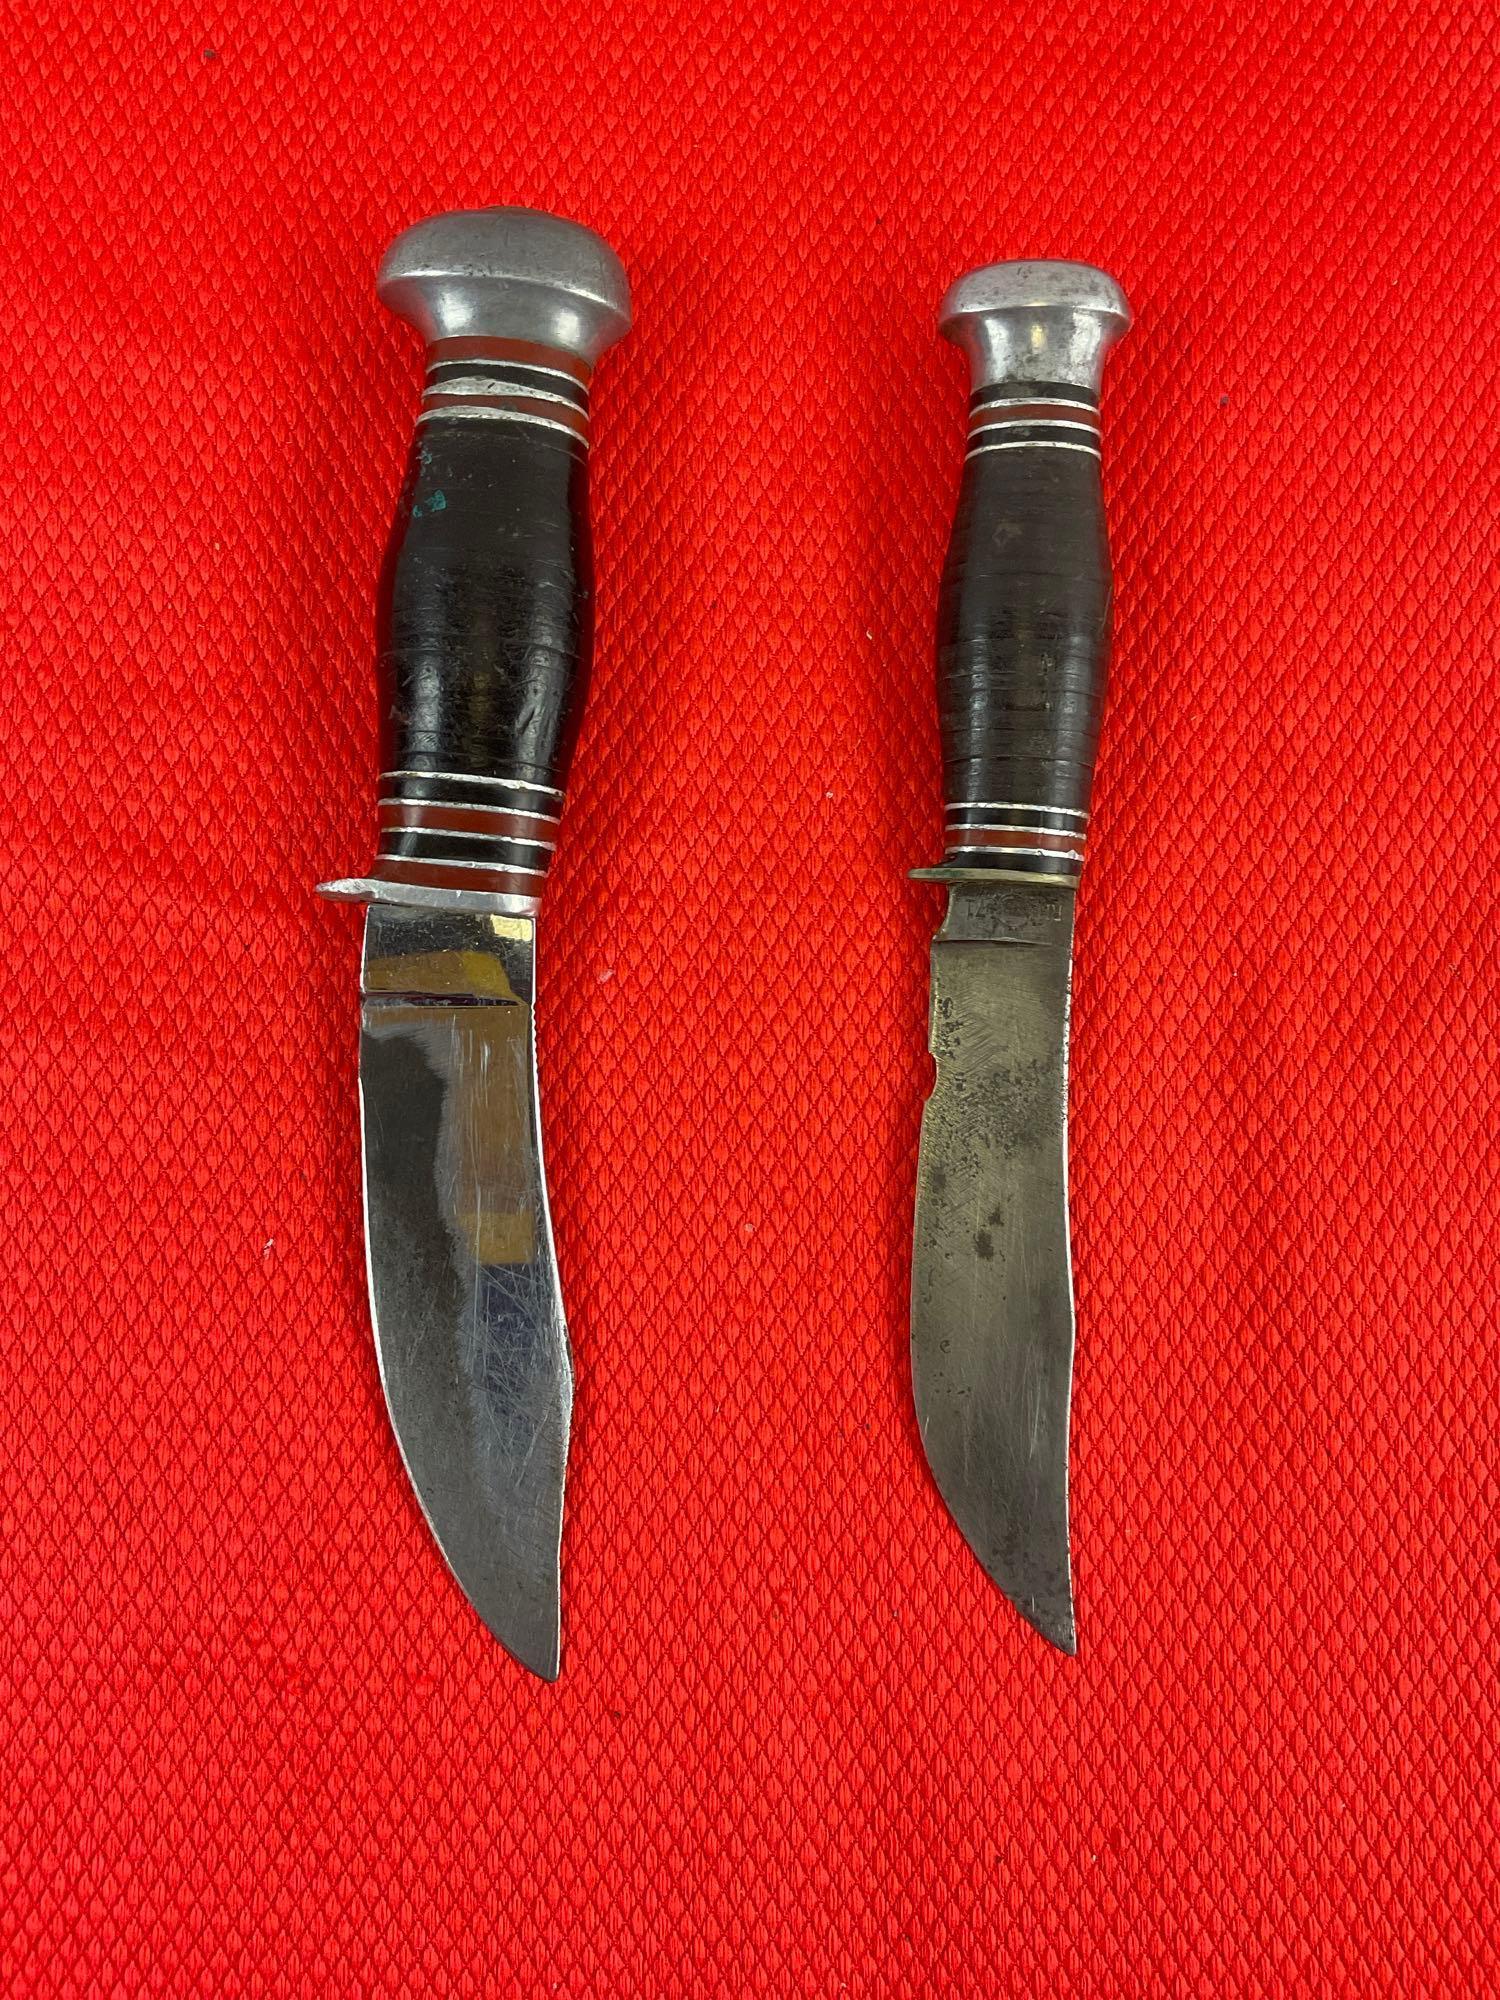 2 pcs Vintage Remington Collectible Steel Fixed Blade Hunting Knives Models The Dartsman & RH71. ...